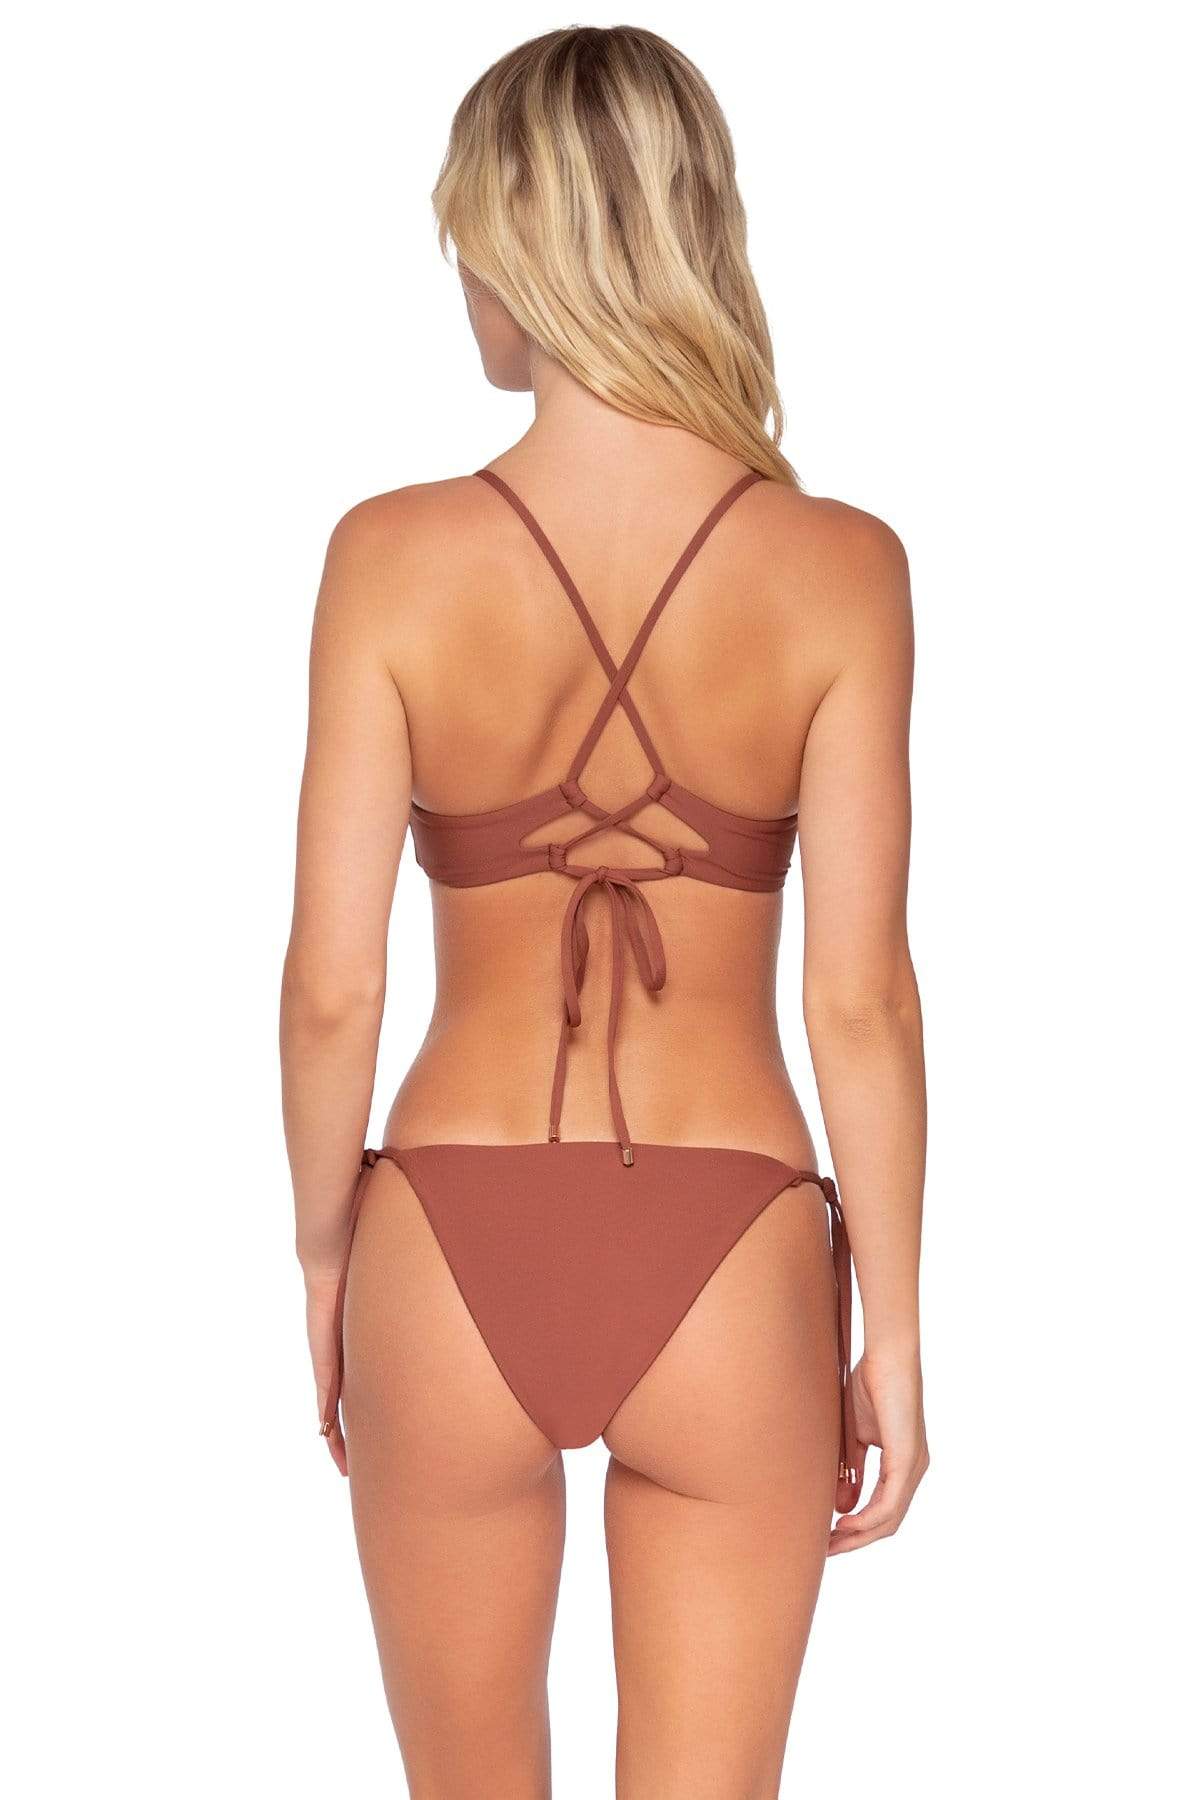 Bestswimwear -  Swim Systems Canyon Clay Holly Tie Side